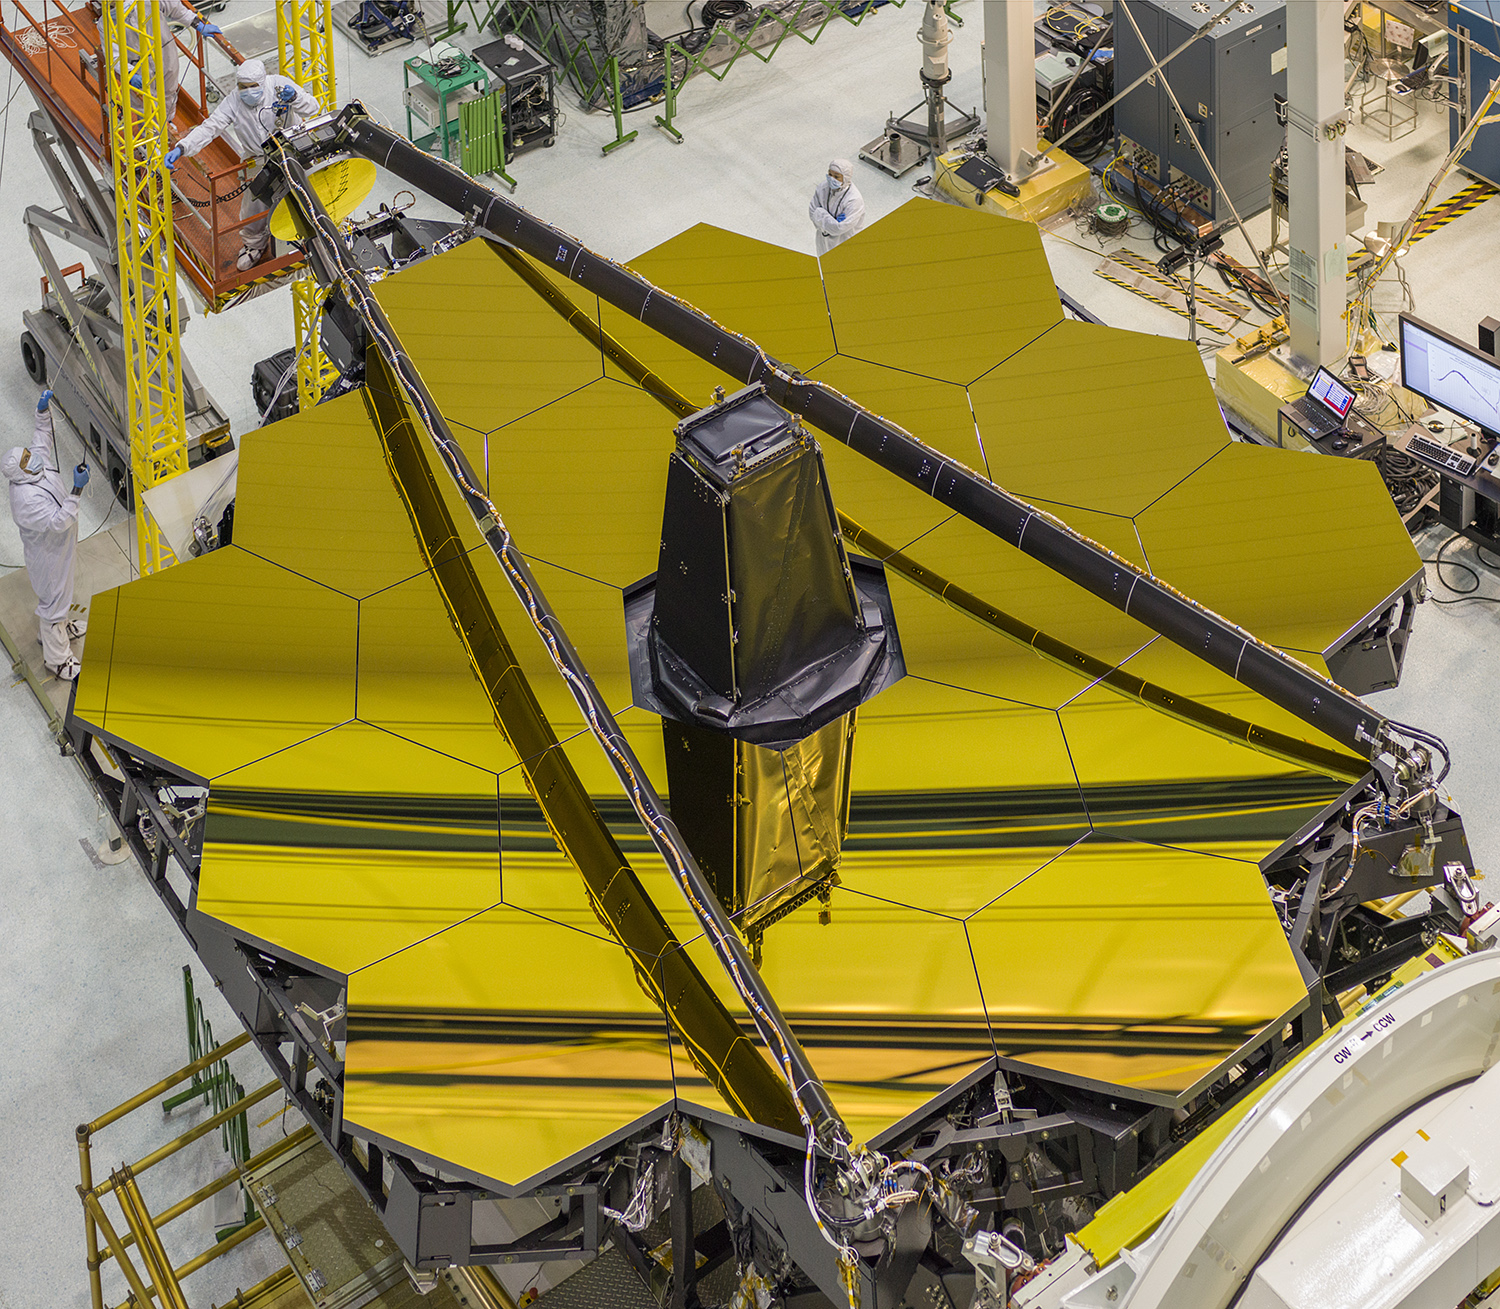 An overhead view of the James Webb Space Telescope primary mirror. Image by NASA, Chris Gunn used under fair use.